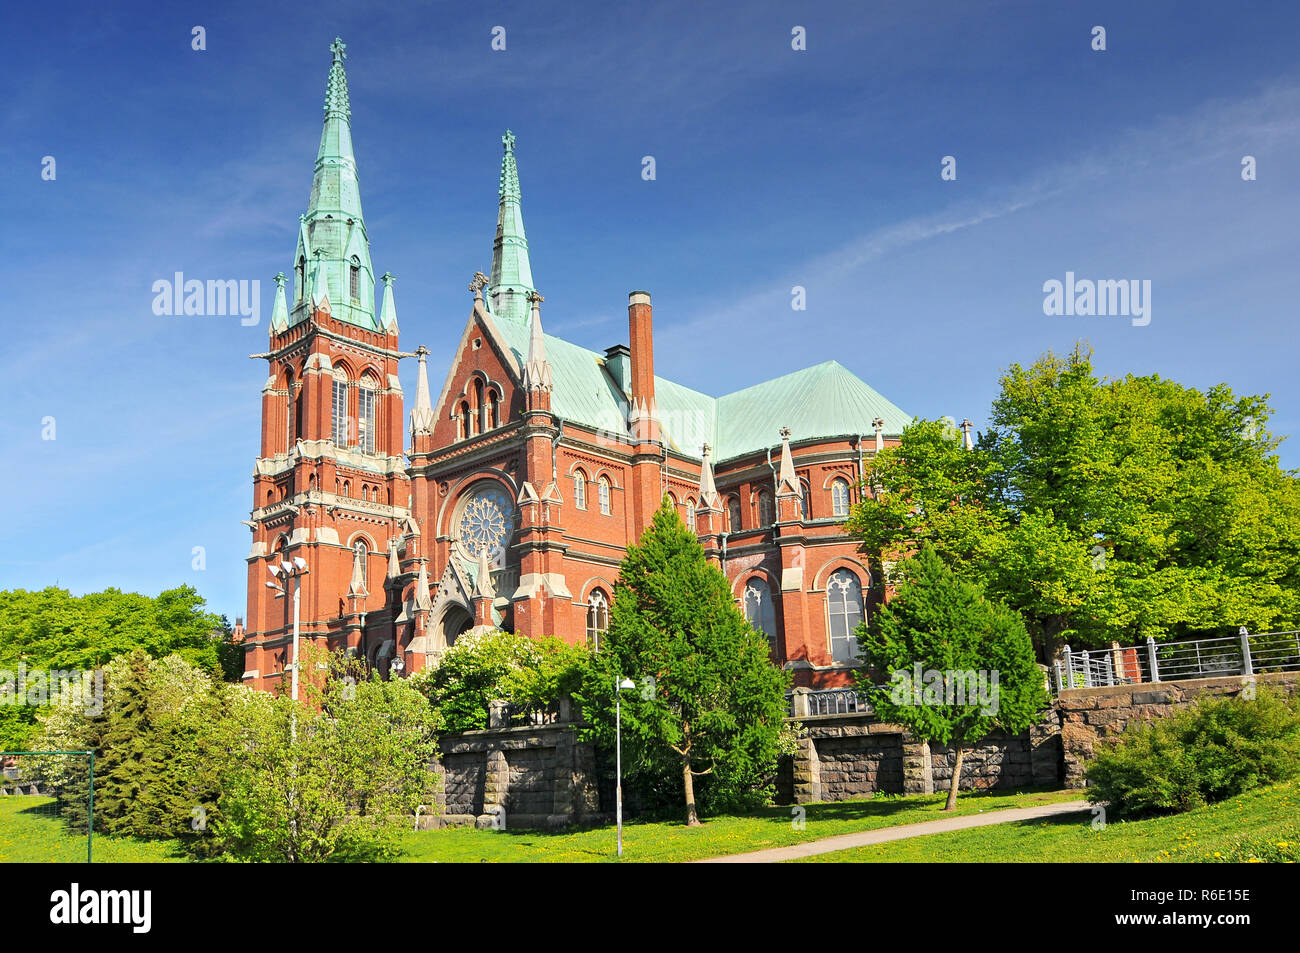 St John'S Church In Helsinki, Finland Is A Lutheran Church Designed By The Swedish Architect Adolf Melander In The Gothic Revival Style Stock Photo